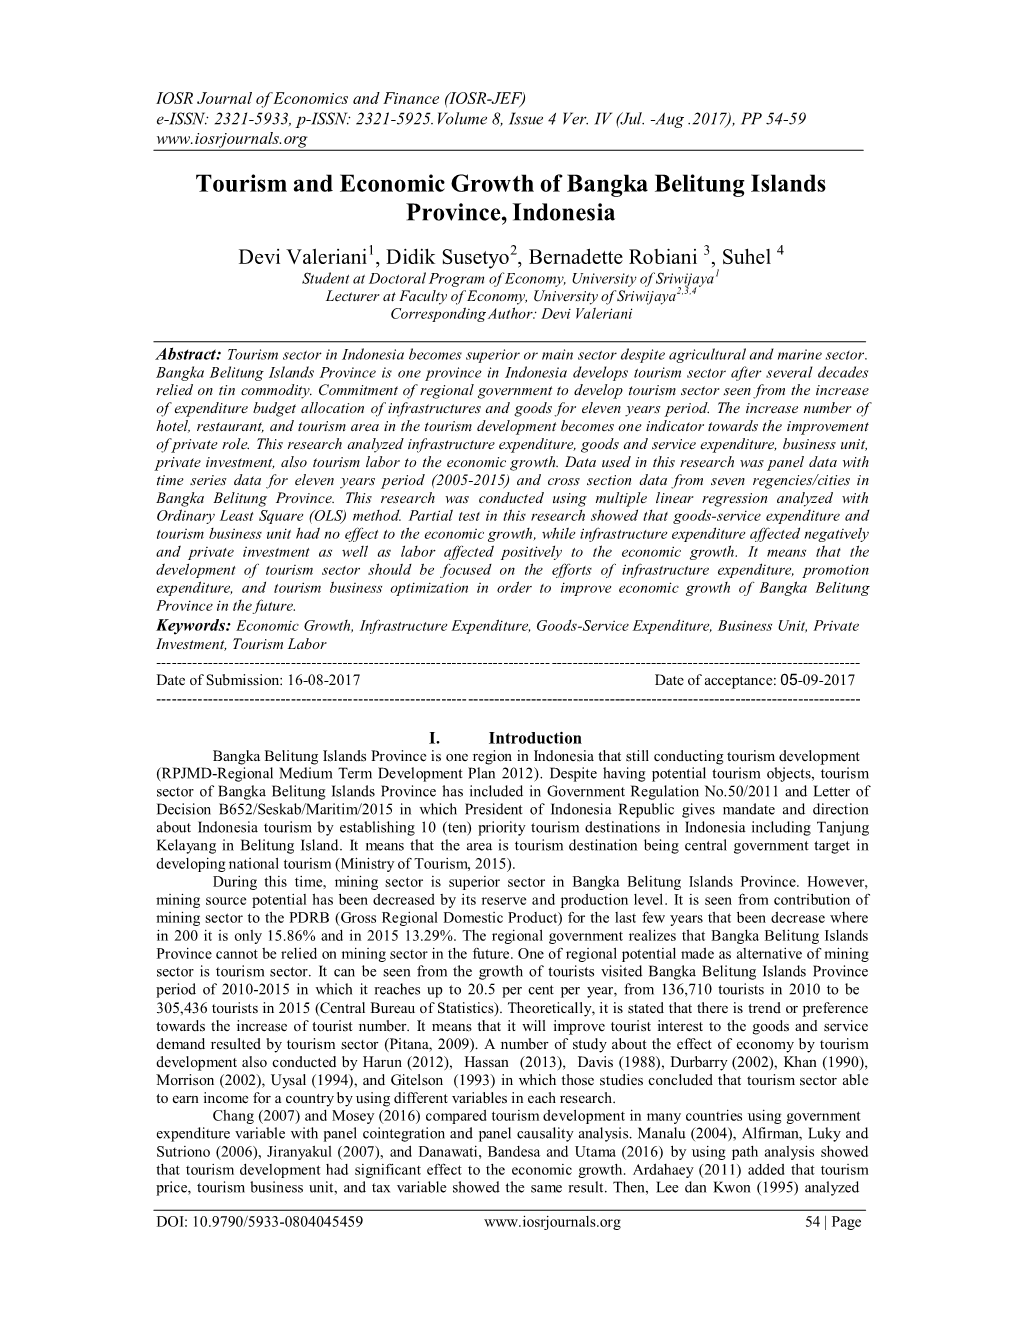 Tourism and Economic Growth of Bangka Belitung Islands Province, Indonesia